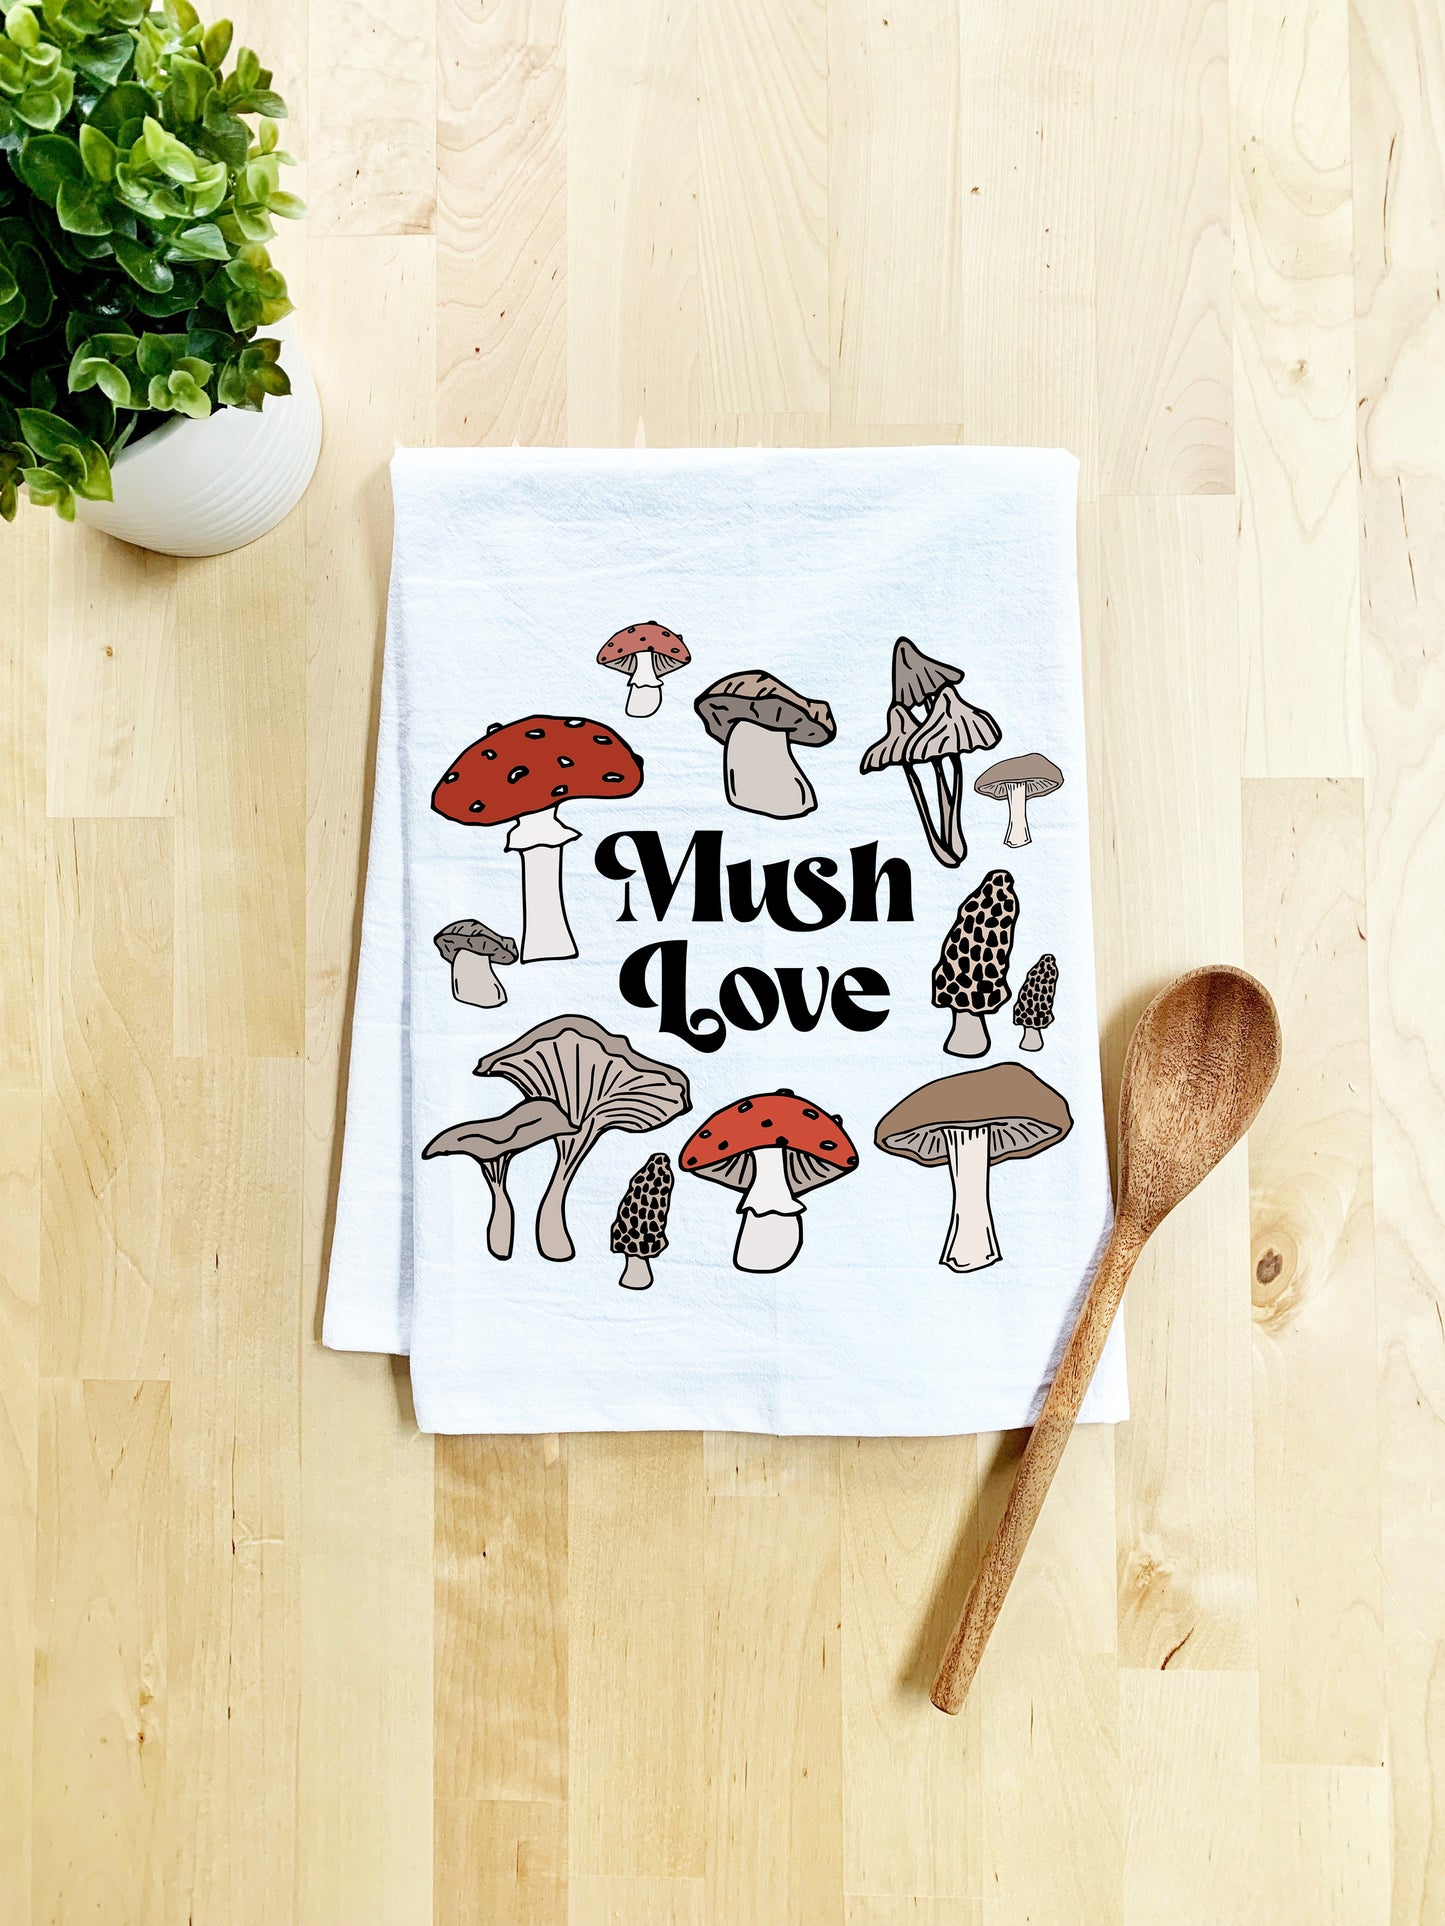 a dish towel with mushrooms printed on it